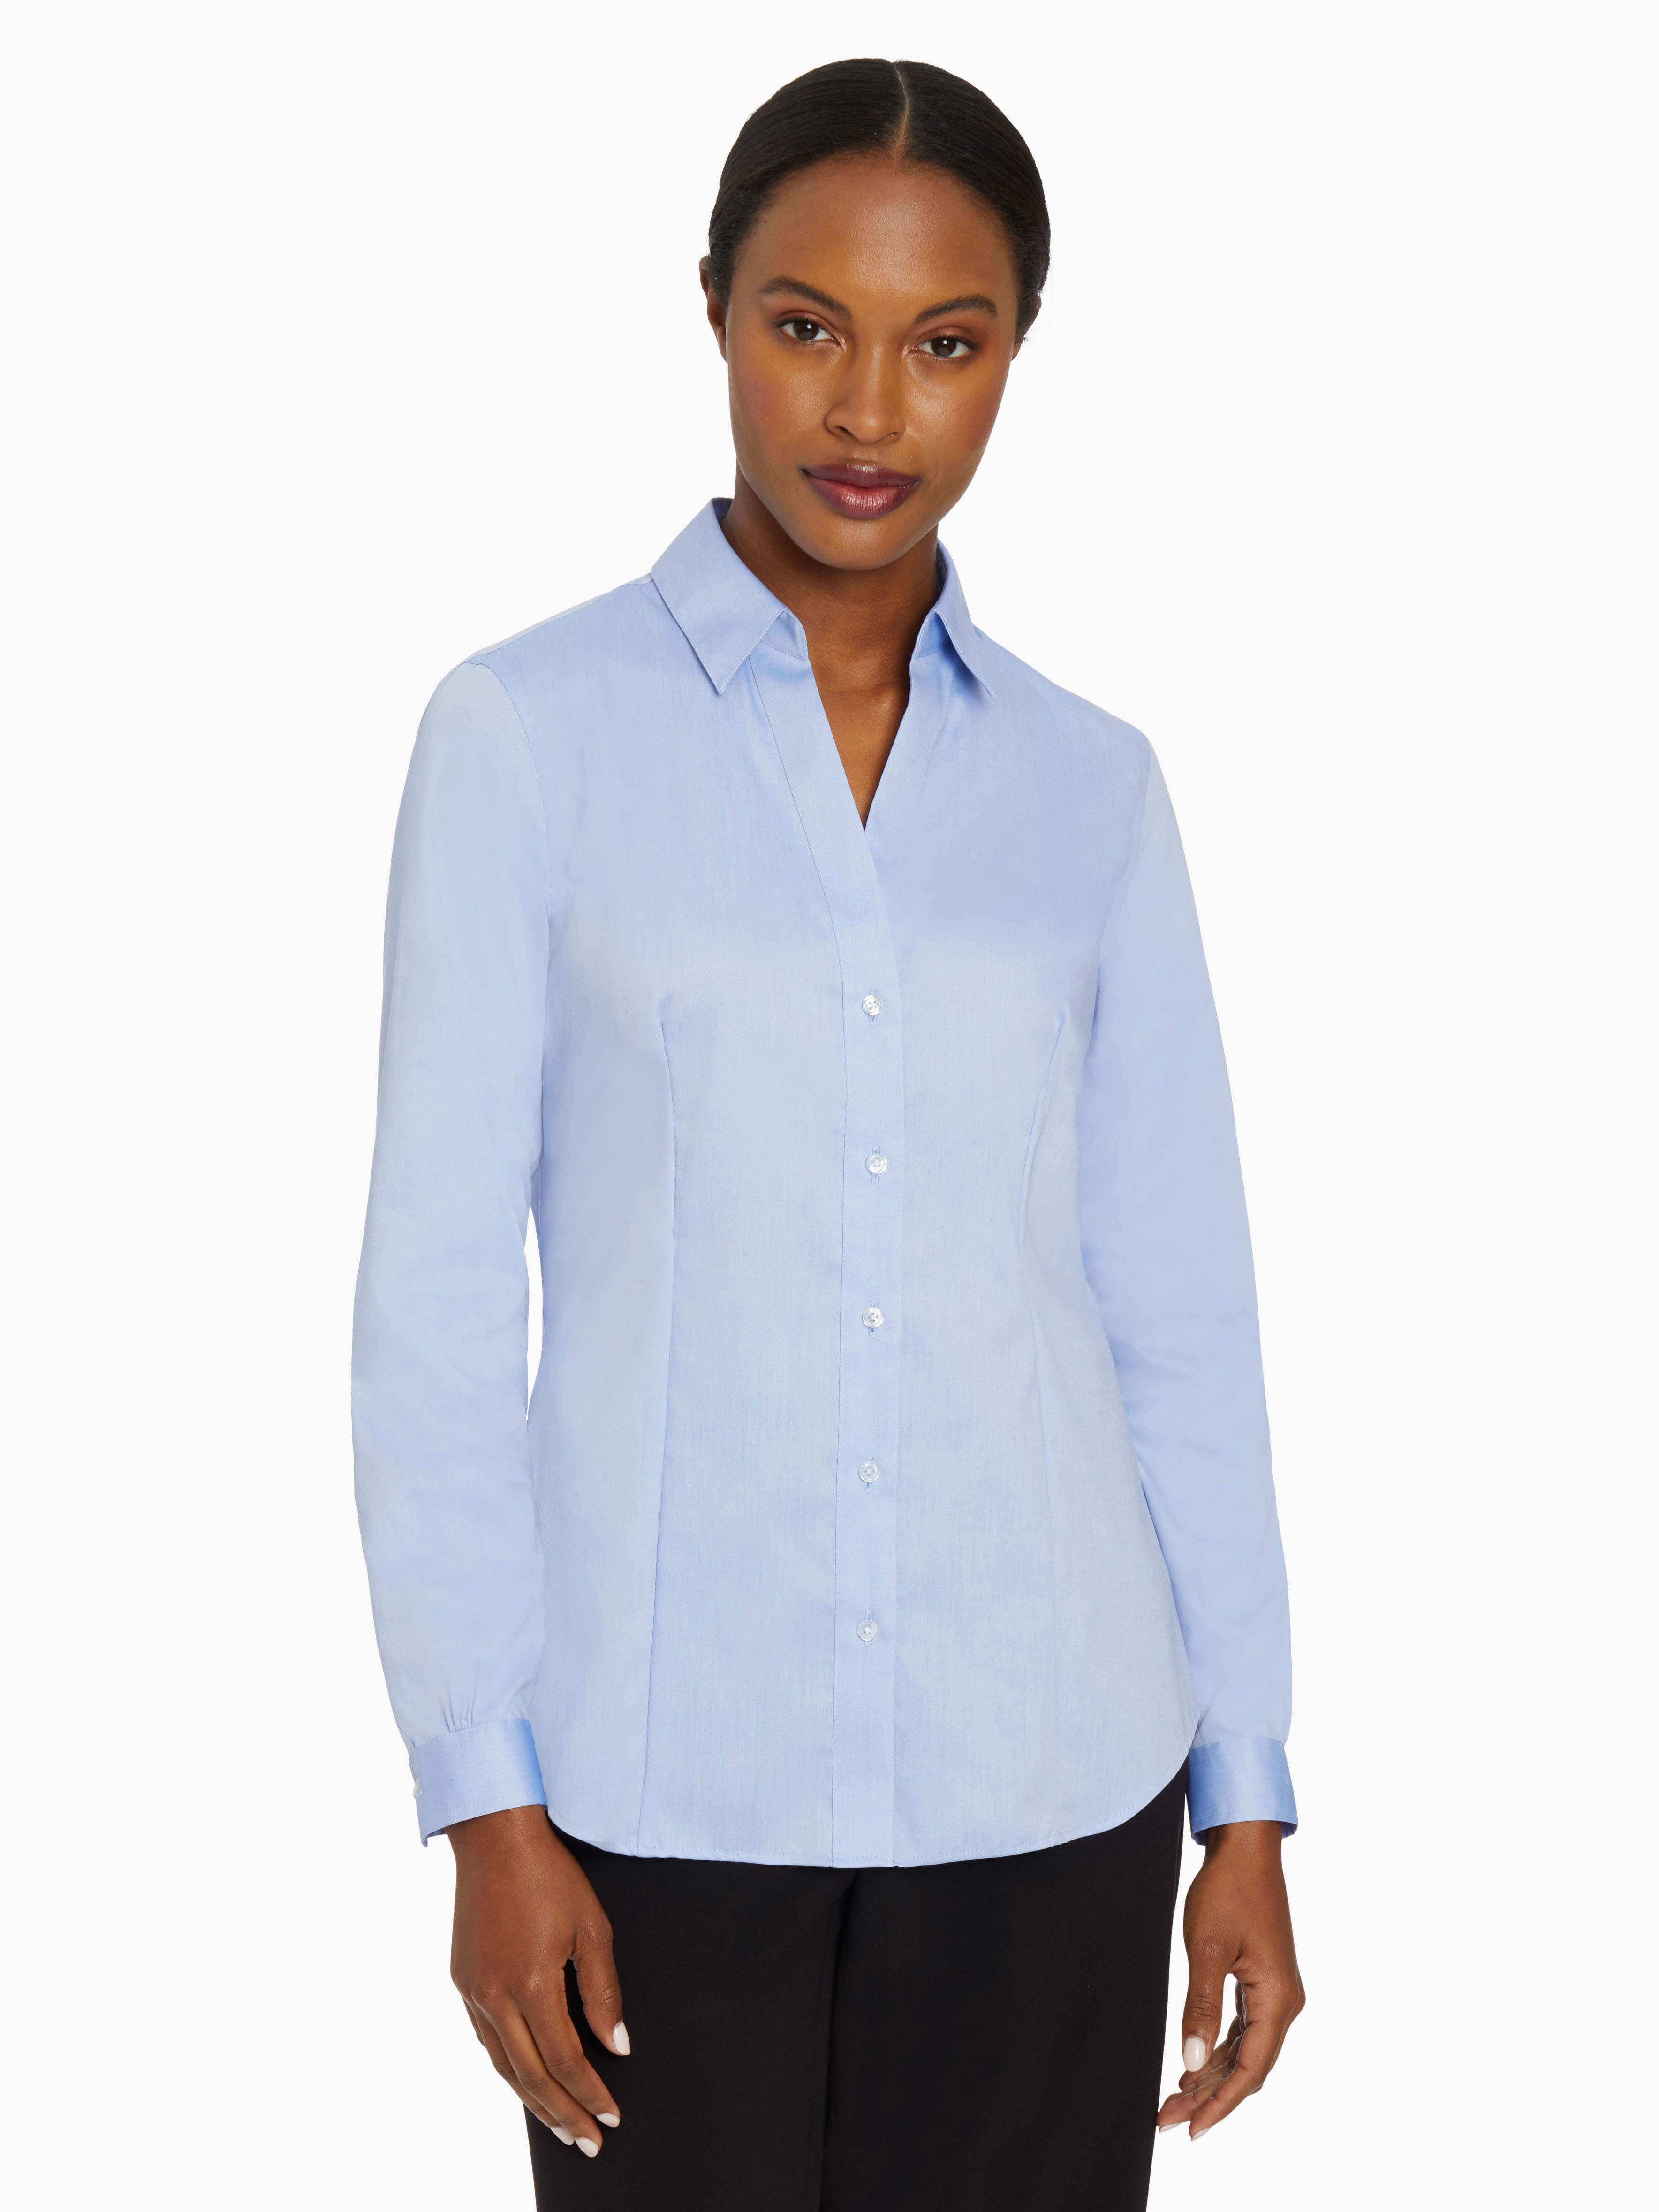 Blue Easy-Care Shirt - Button Front Shirt